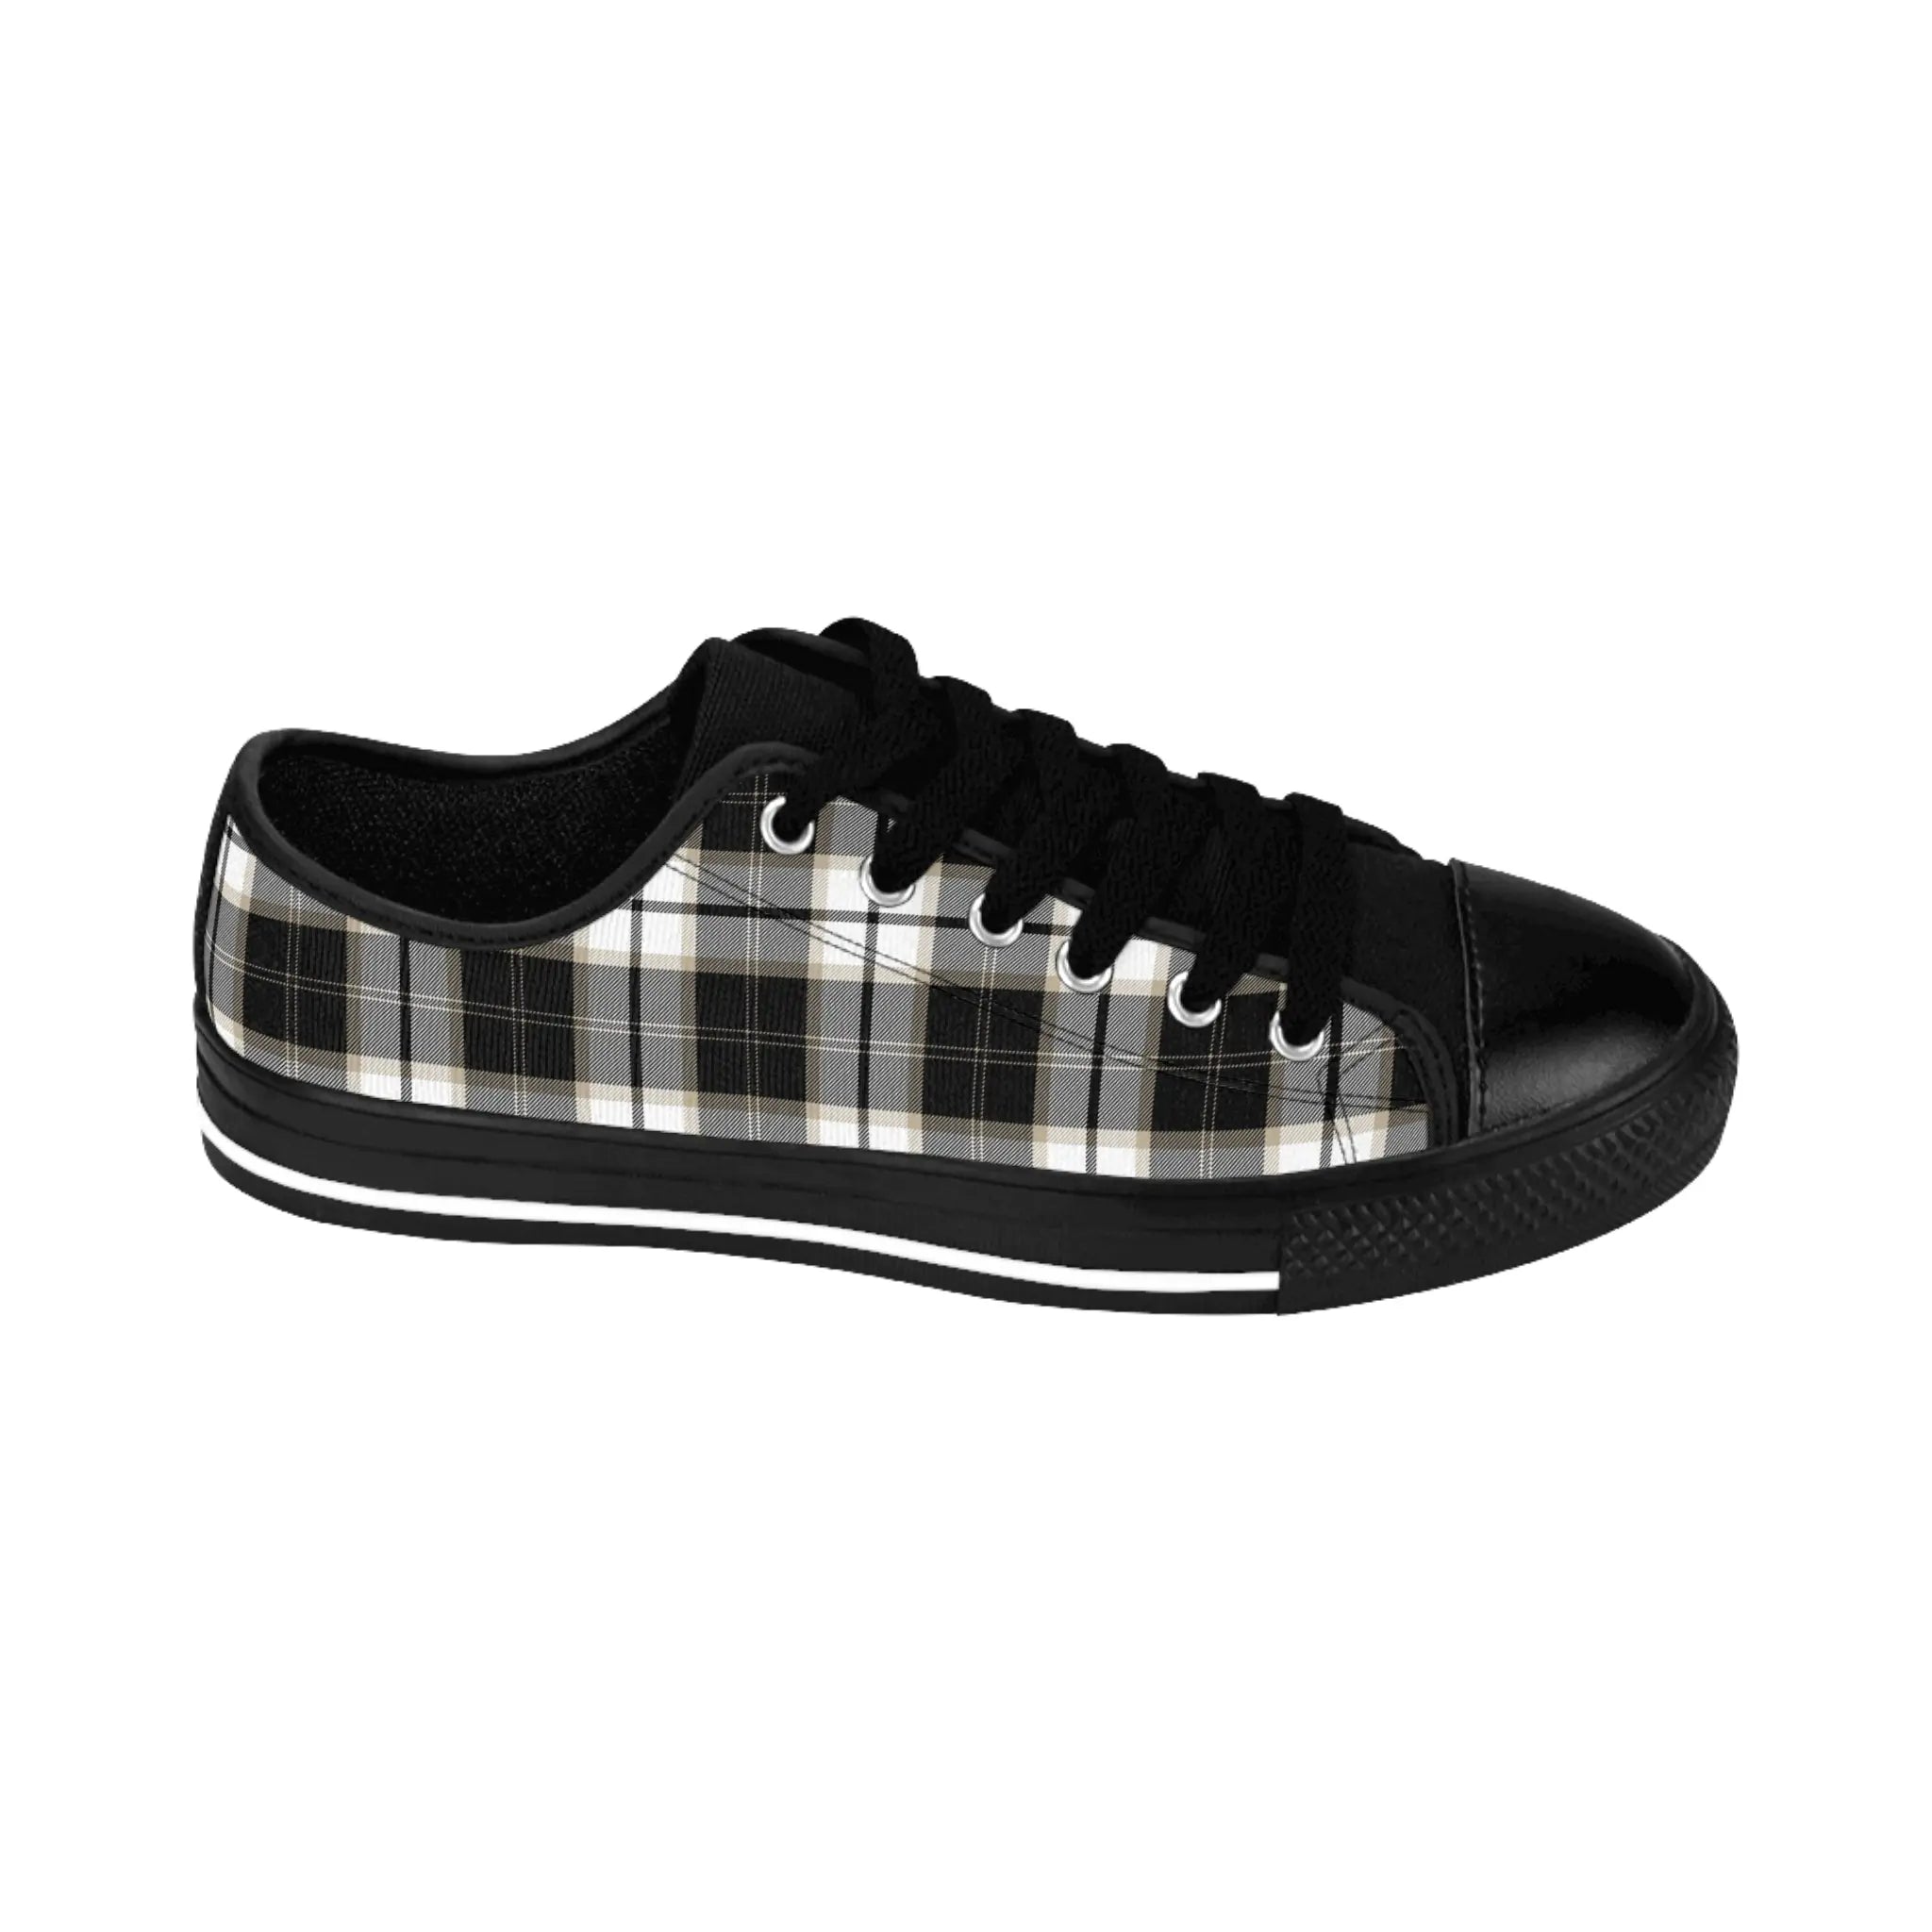  Groove Fashion Collection Black and White Plaid Women's Low Top Canvas Shoes ShoesUS7Blacksole